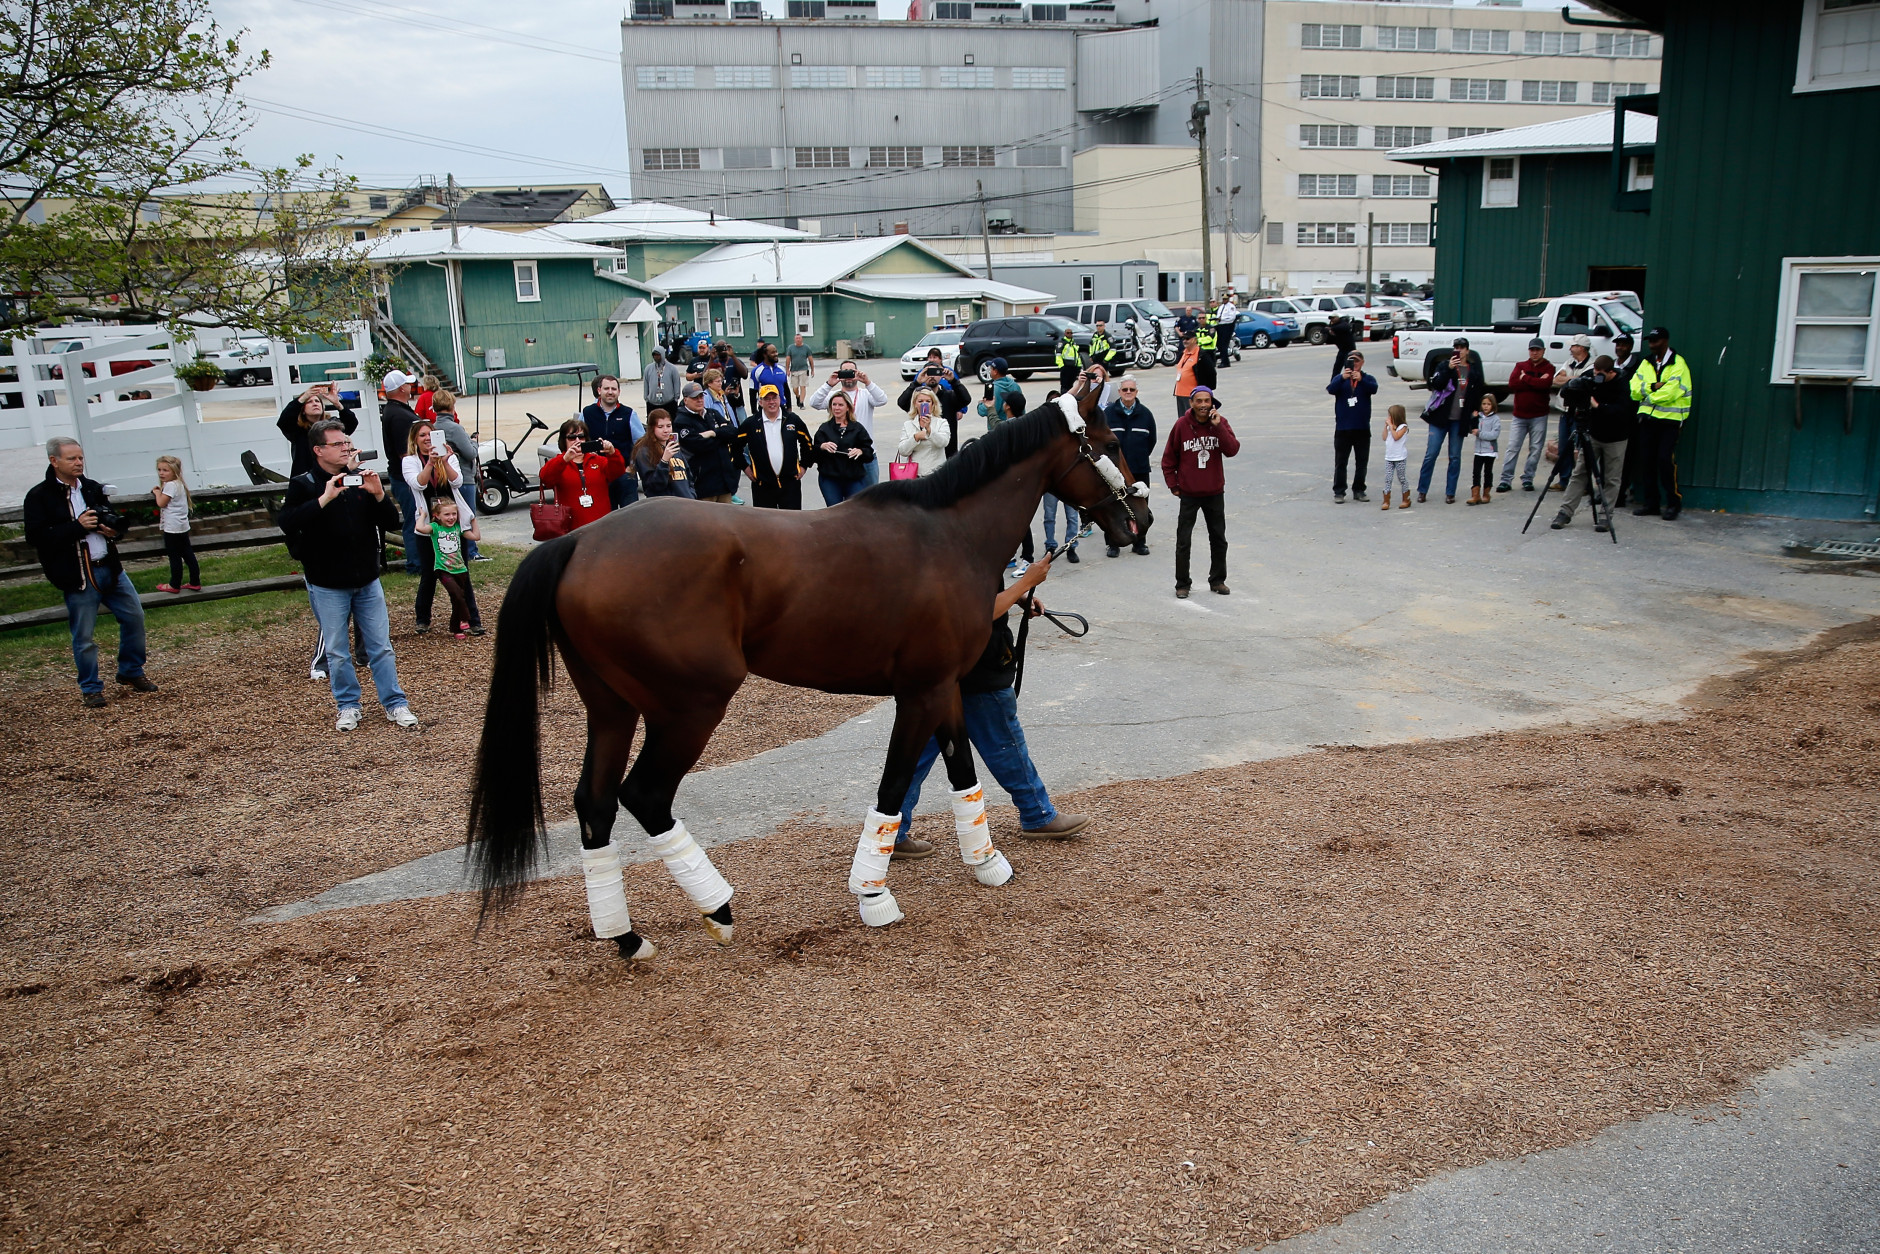 Kentucky Derby winner Nyquist arrives at Pimlico Race Course in preparation for the 2016 Preakness Stakes on May 9, 2016 in Baltimore, Maryland.  (Photo by Rob Carr/Getty Images)